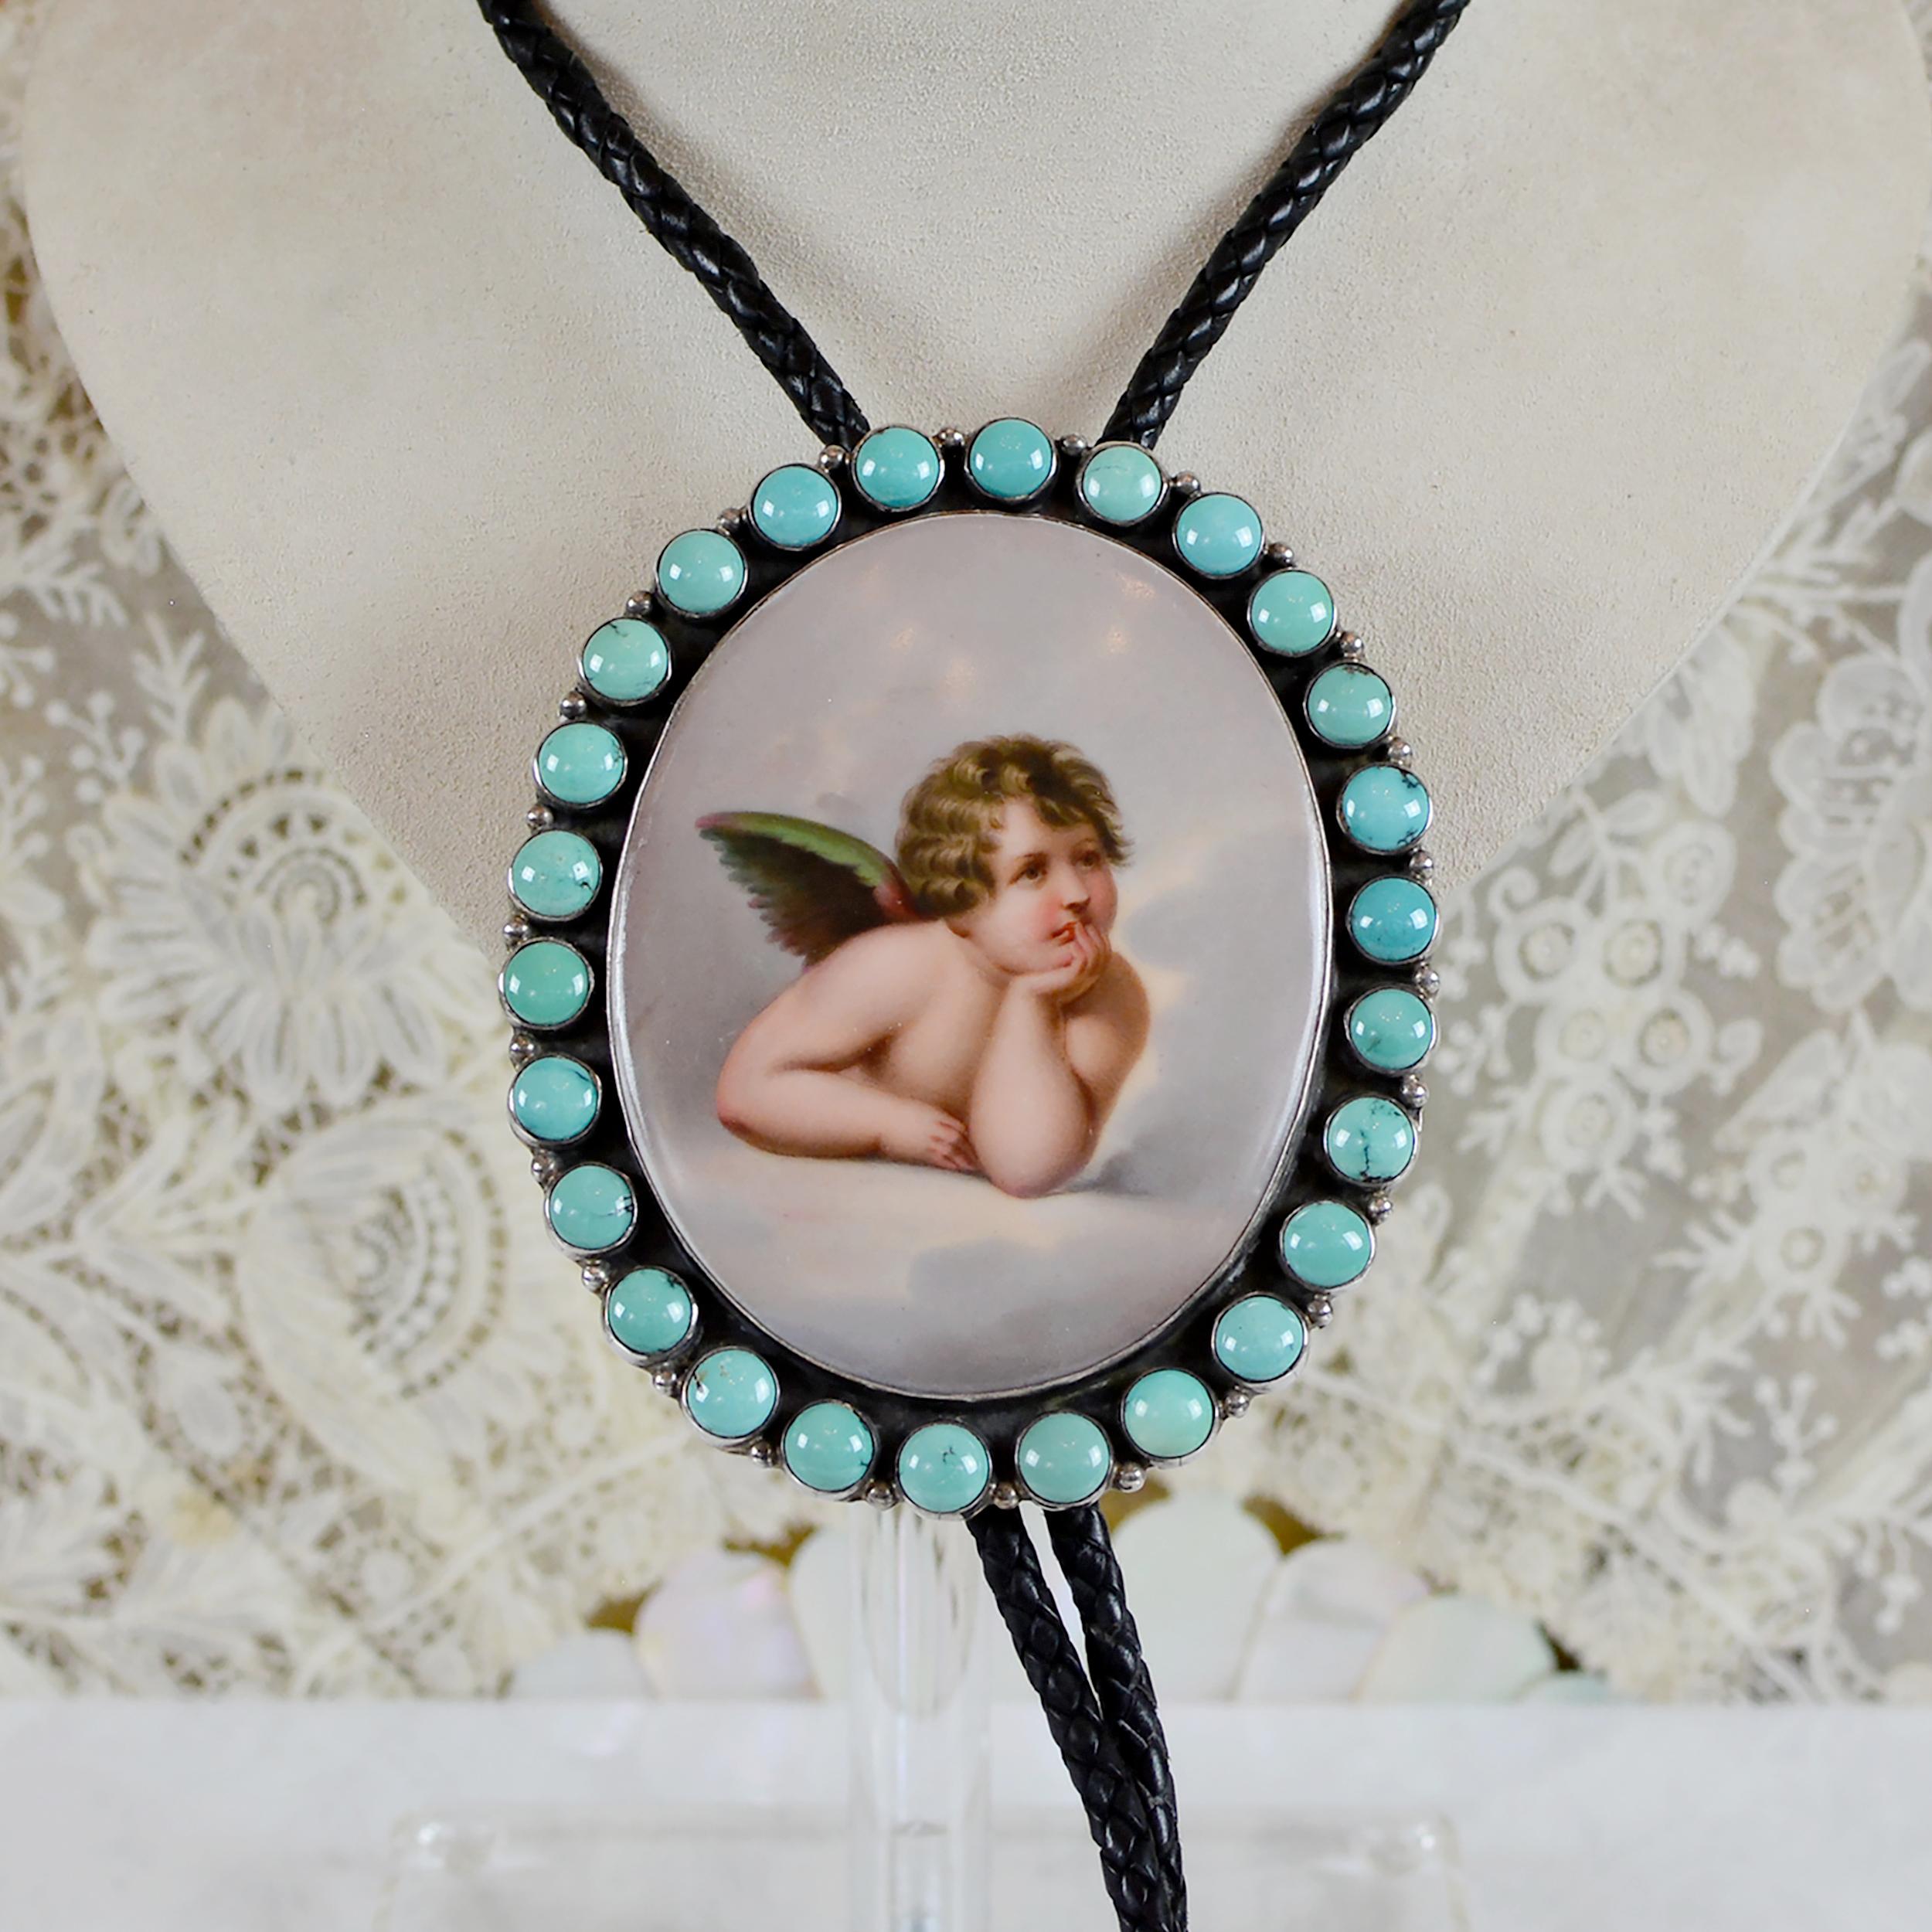 Jill Garber 19th Century Sistine Madonna Angel Portrait with Turquoise Bolo Tie  For Sale 4